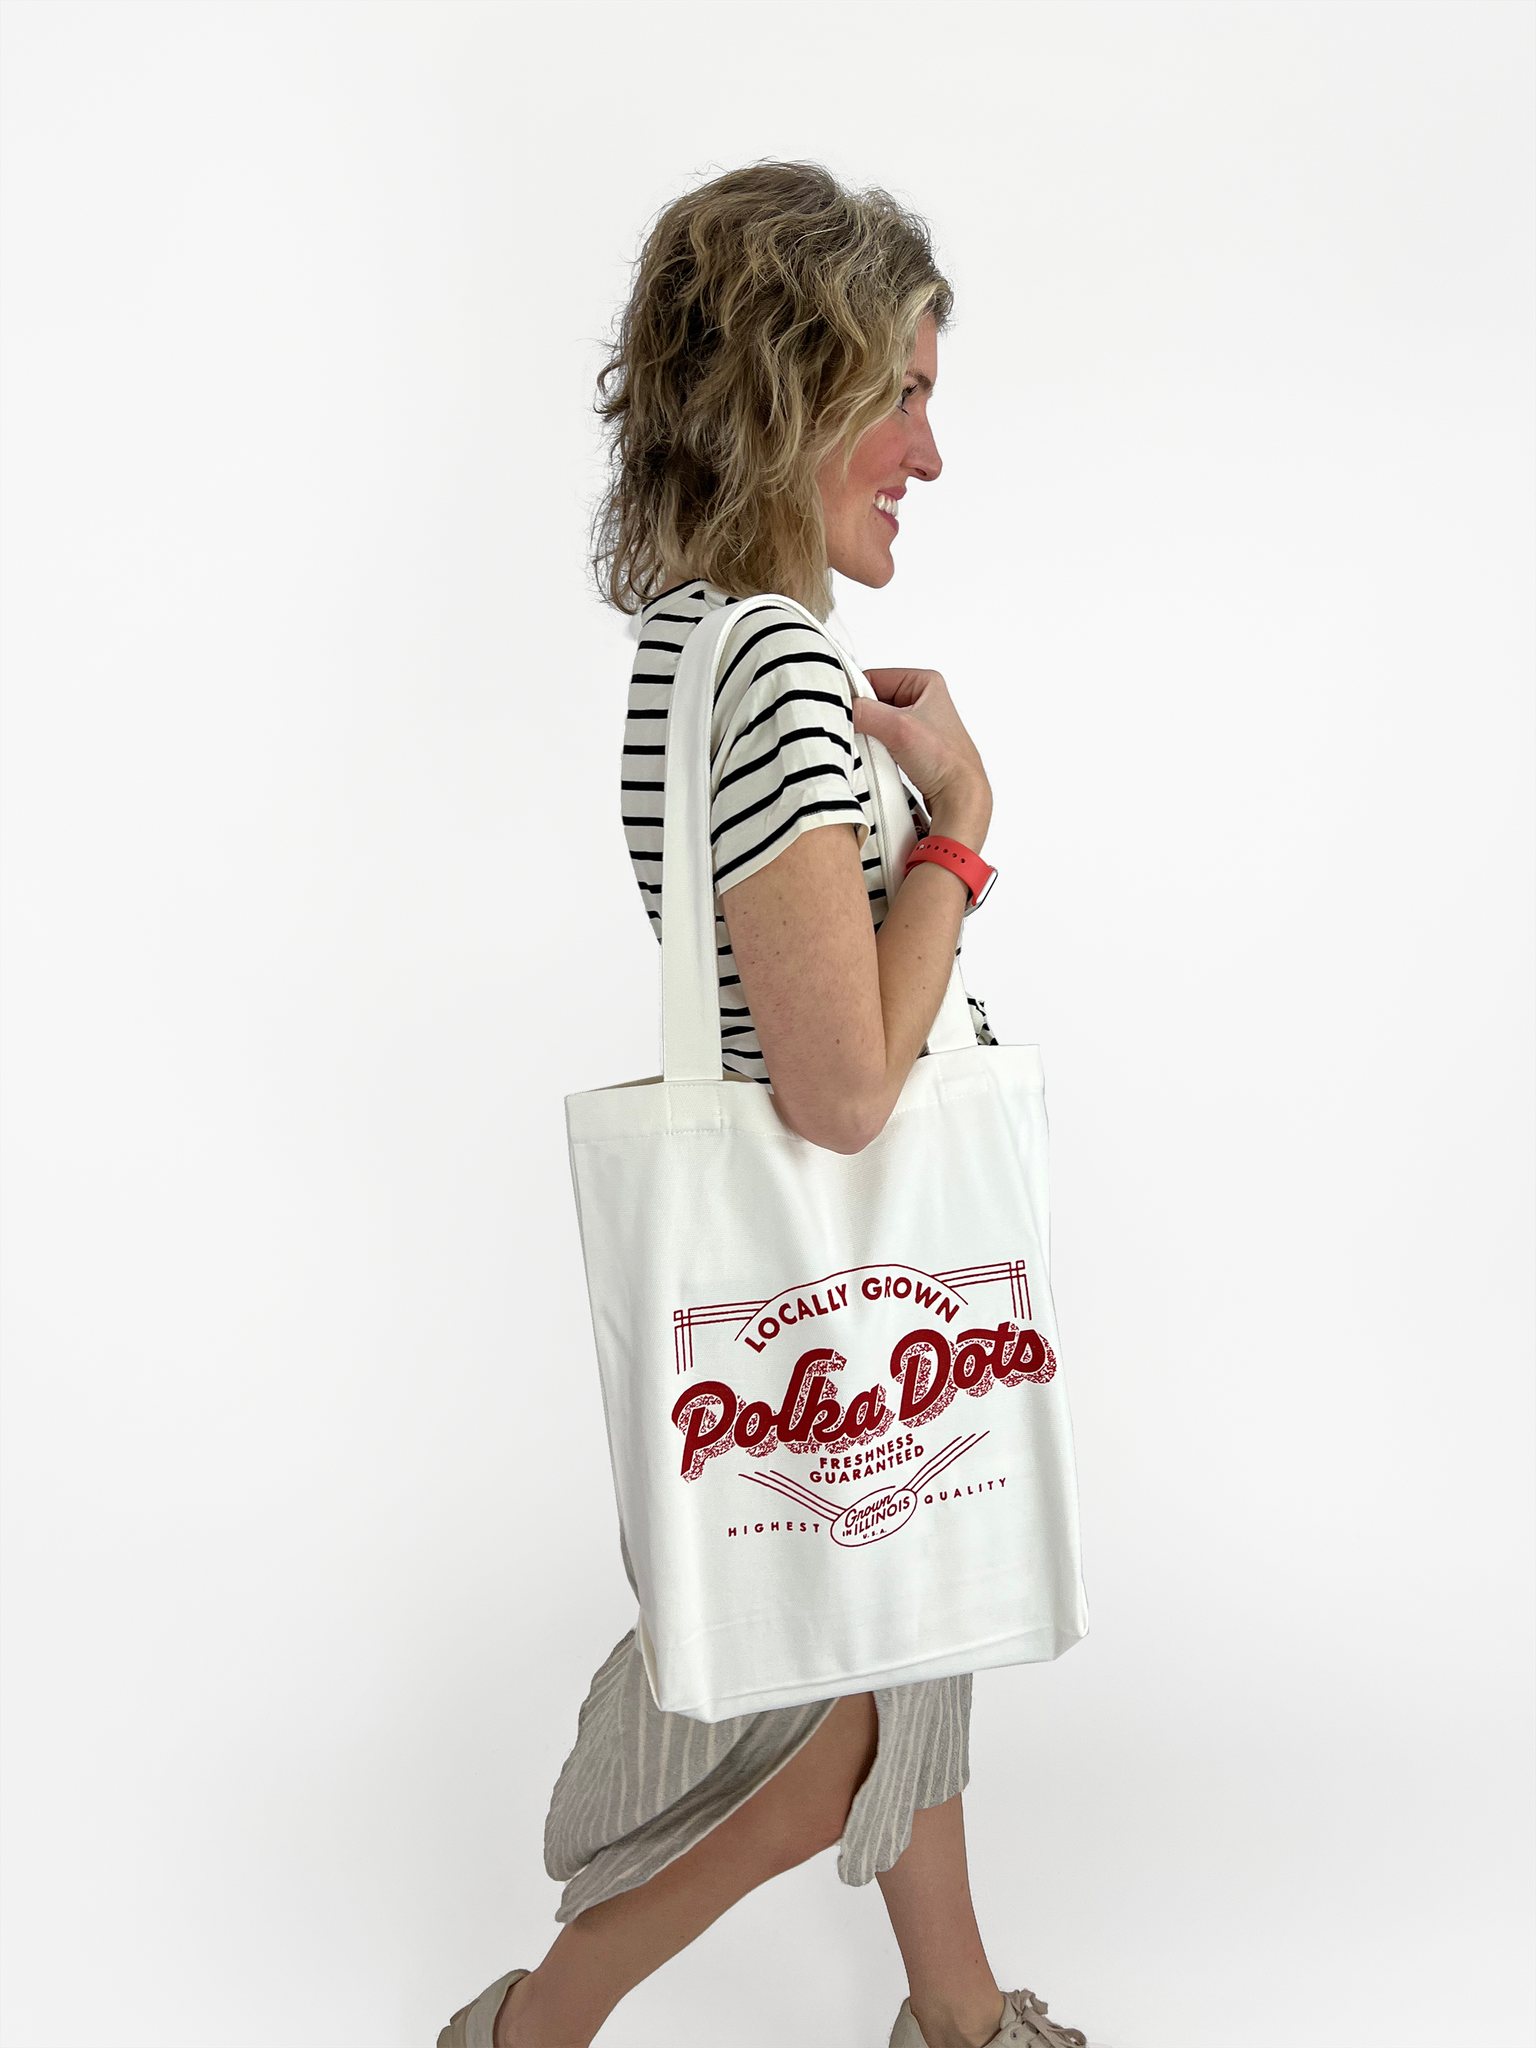 Locally Grown Tote